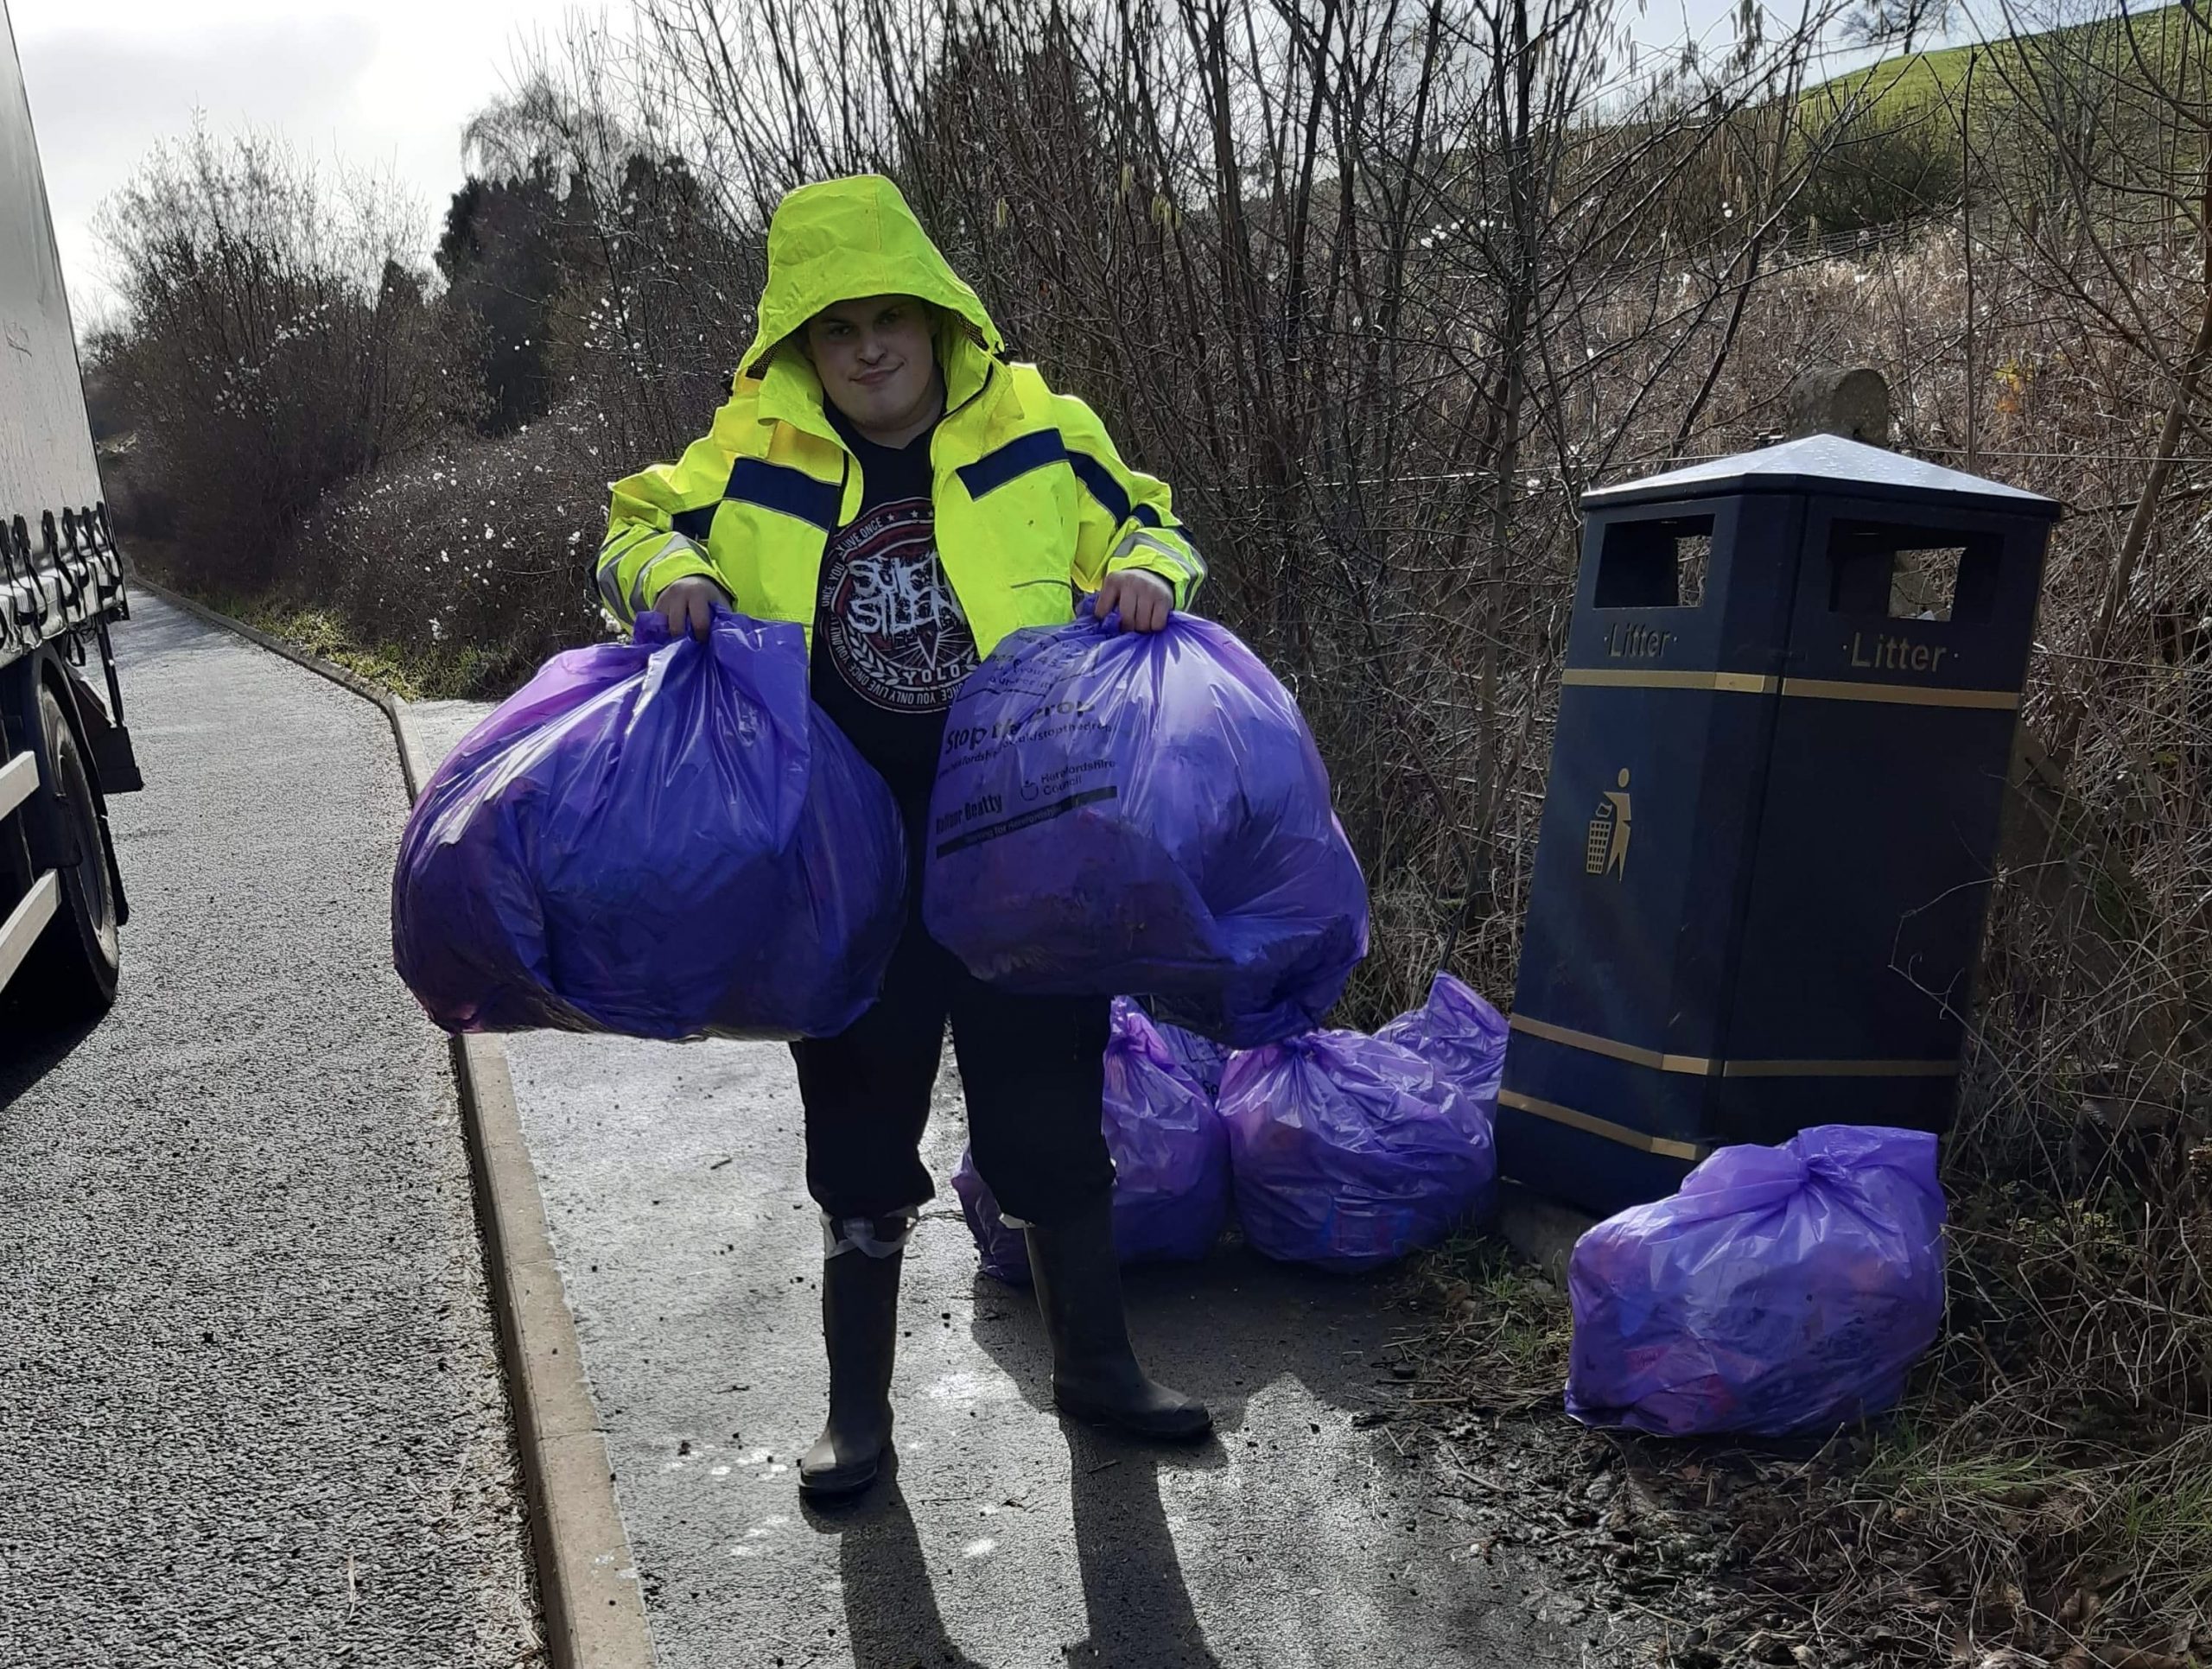 COMMUNITY | He’s done it! Litter picking legend Greg Dunsford has collected 101 bags of litter